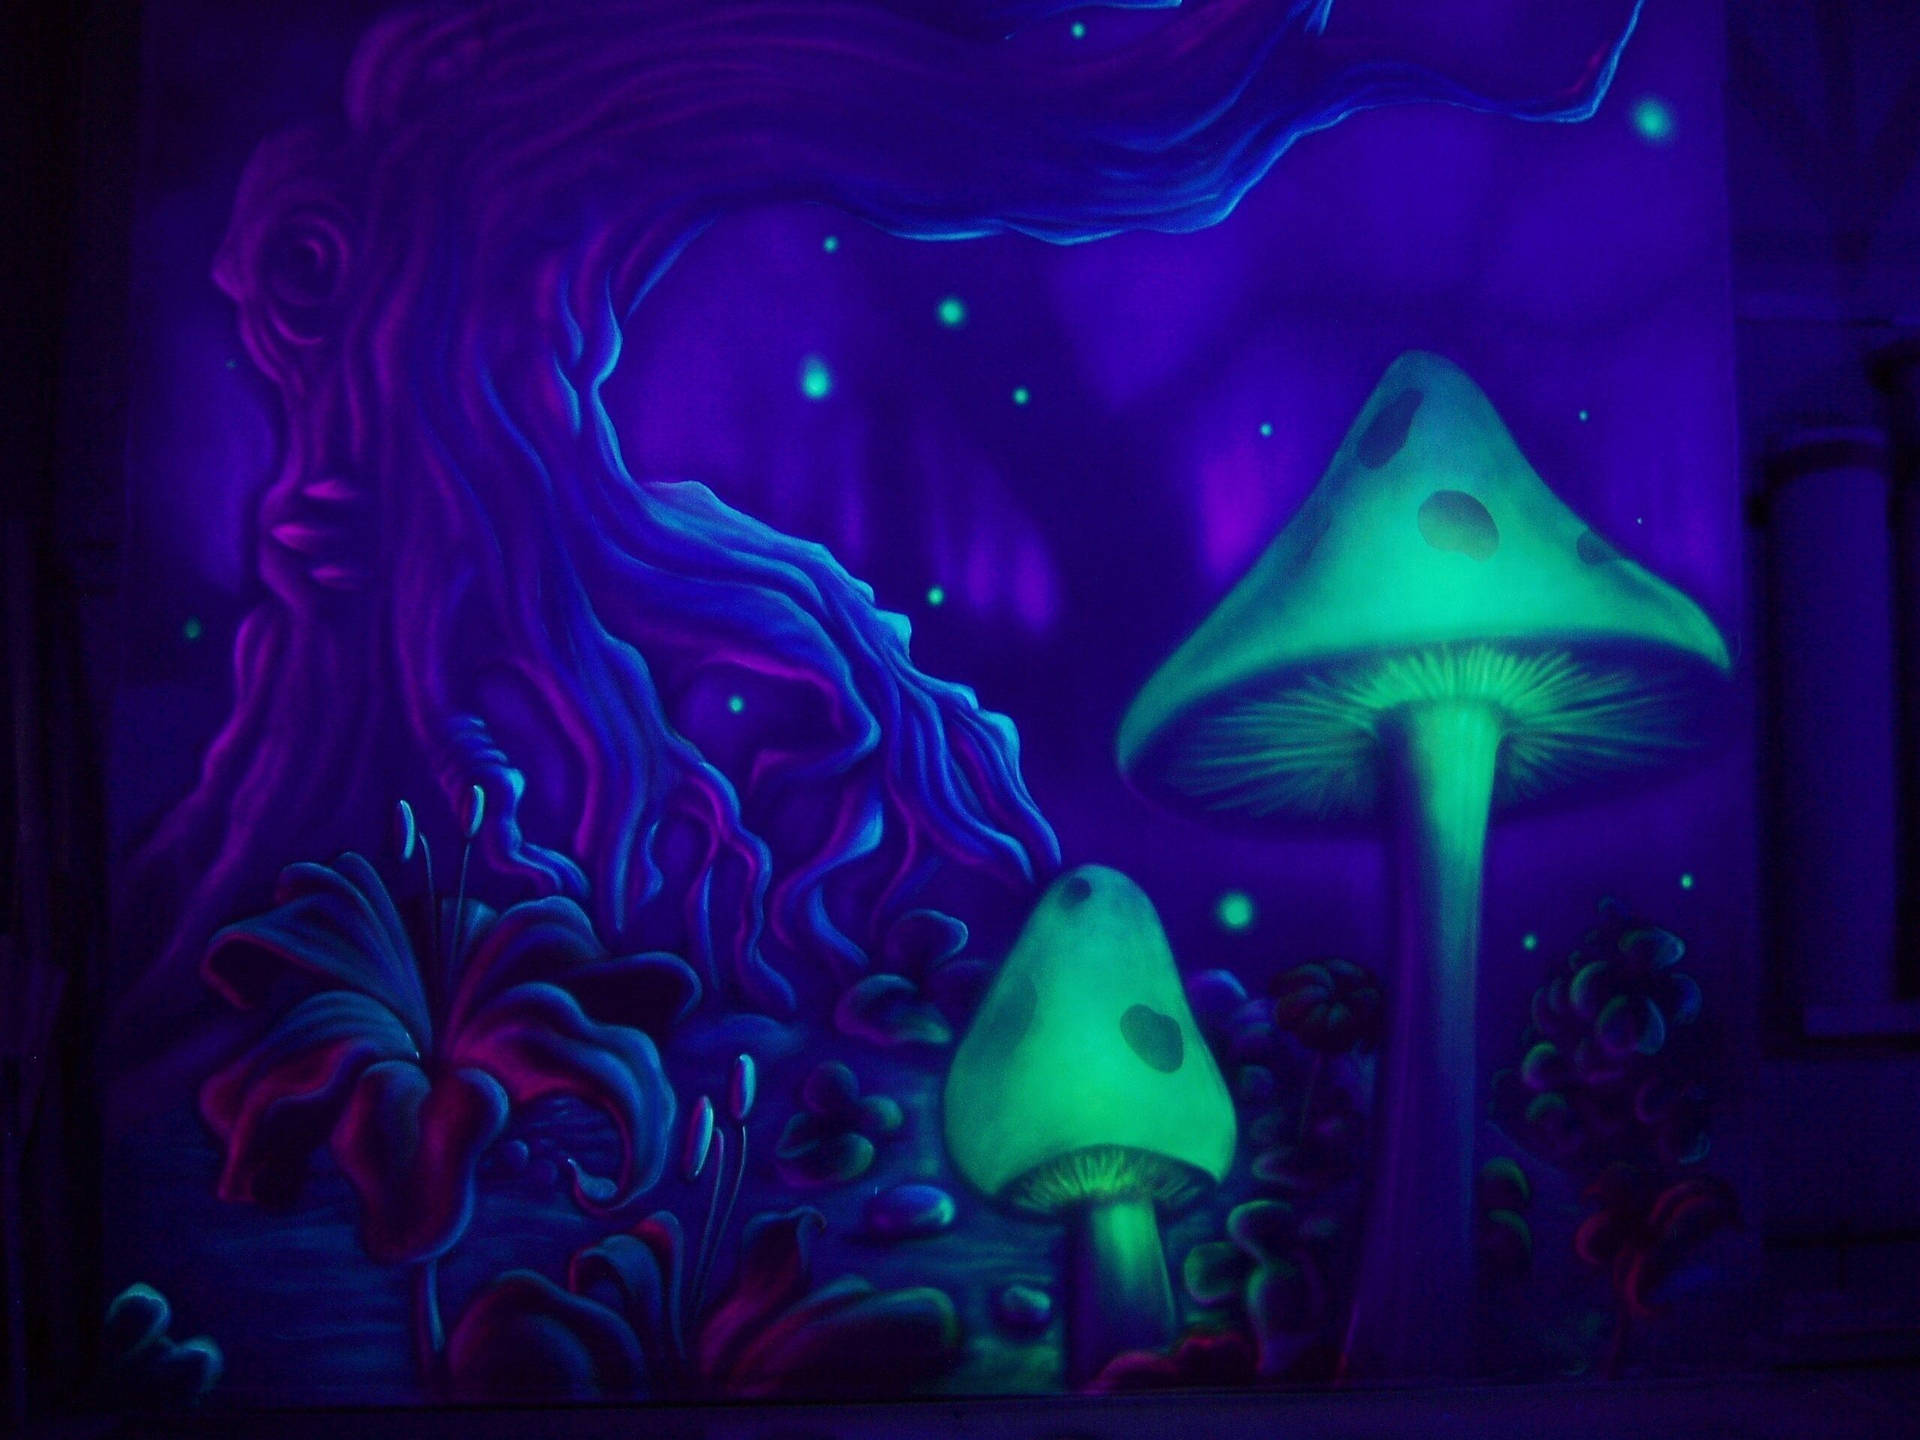 A Purple Painting With Mushrooms And Trees Wallpaper